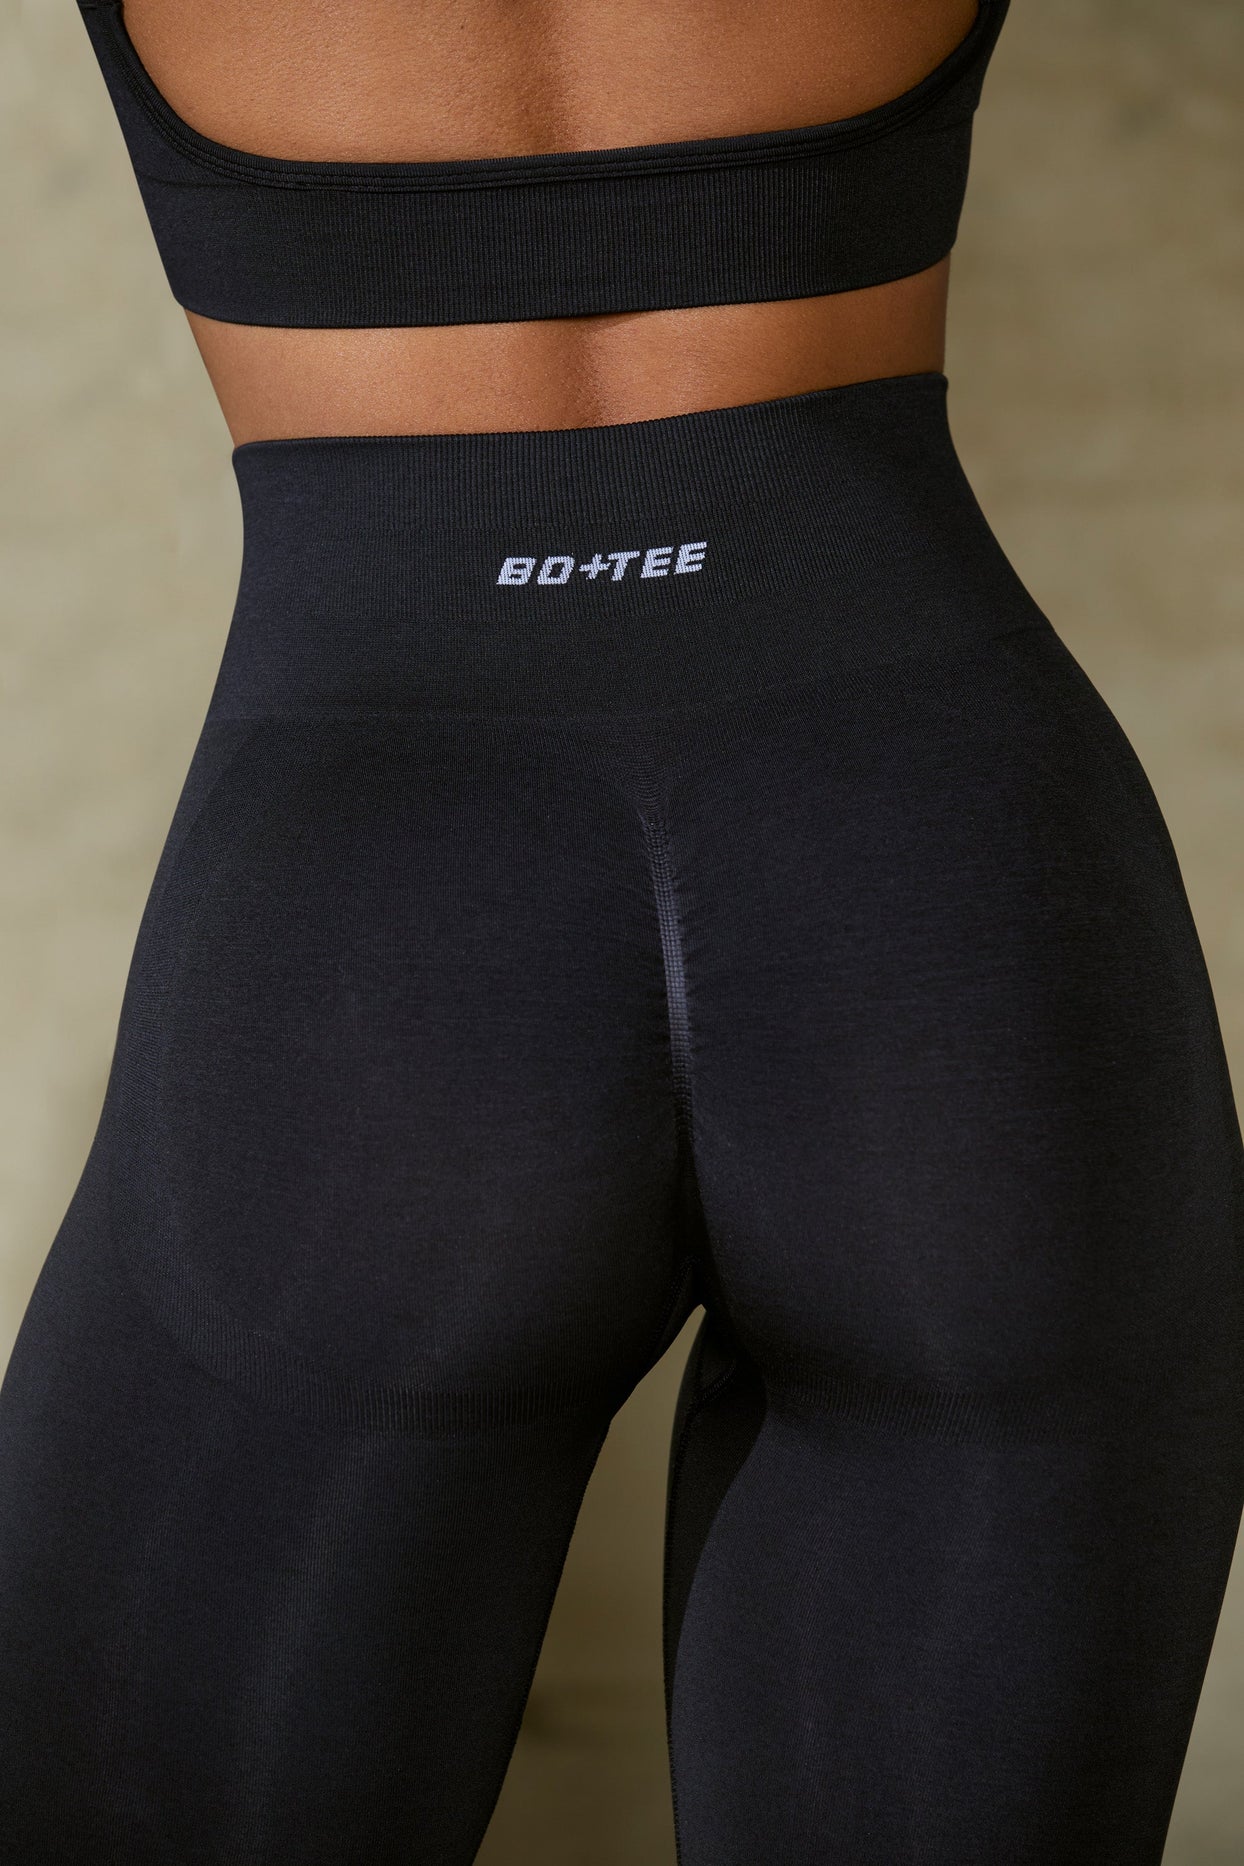 High Waist Seamless Active Zone Yoga Pants For Women Energy Tight